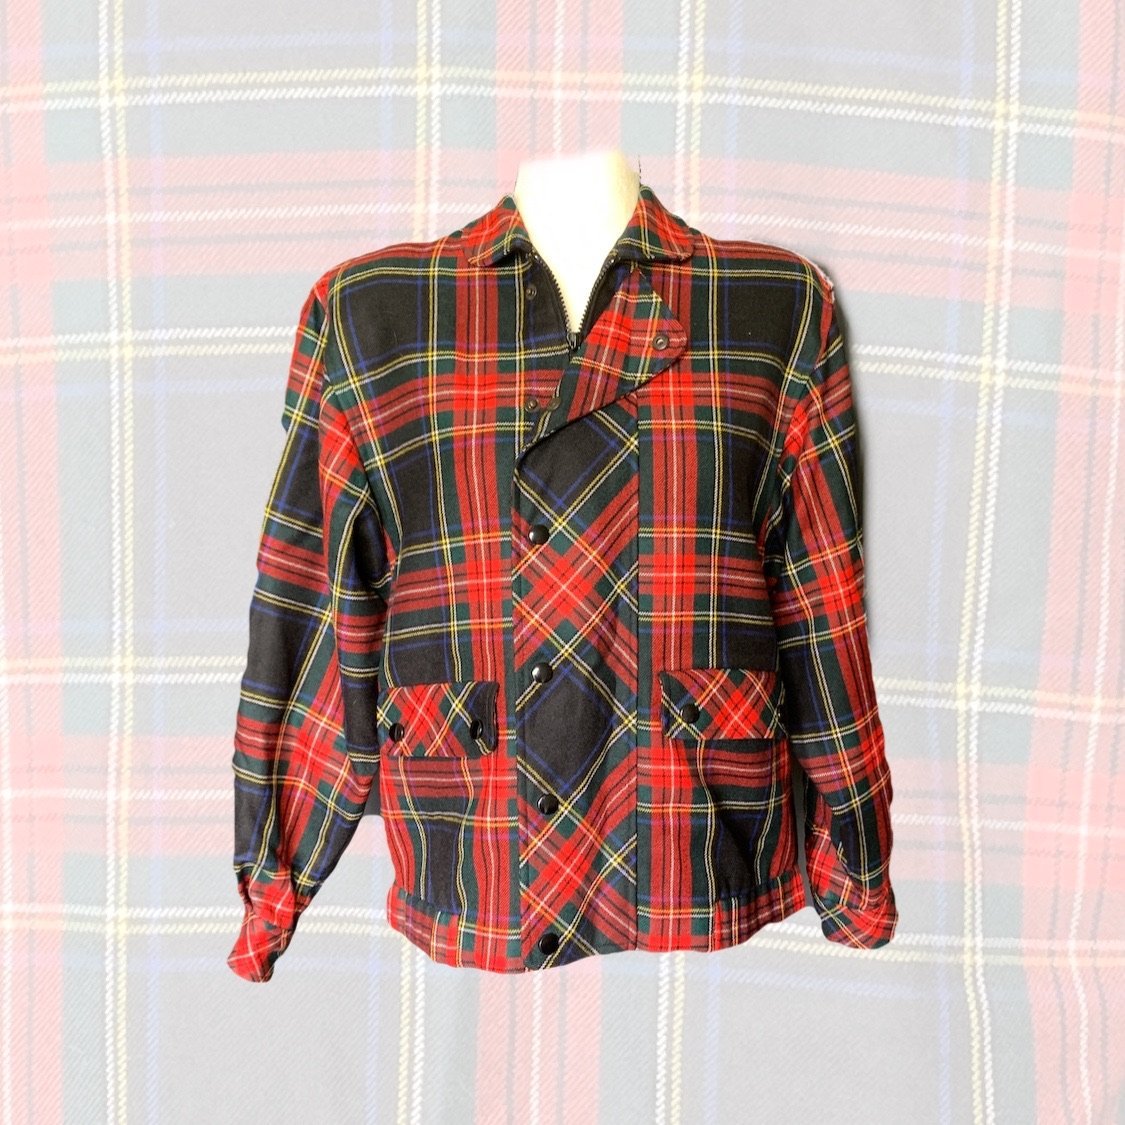 1960s Red Plaid Wool Bomber Jacket by Gloria Gelb. Fall Fashion Trend